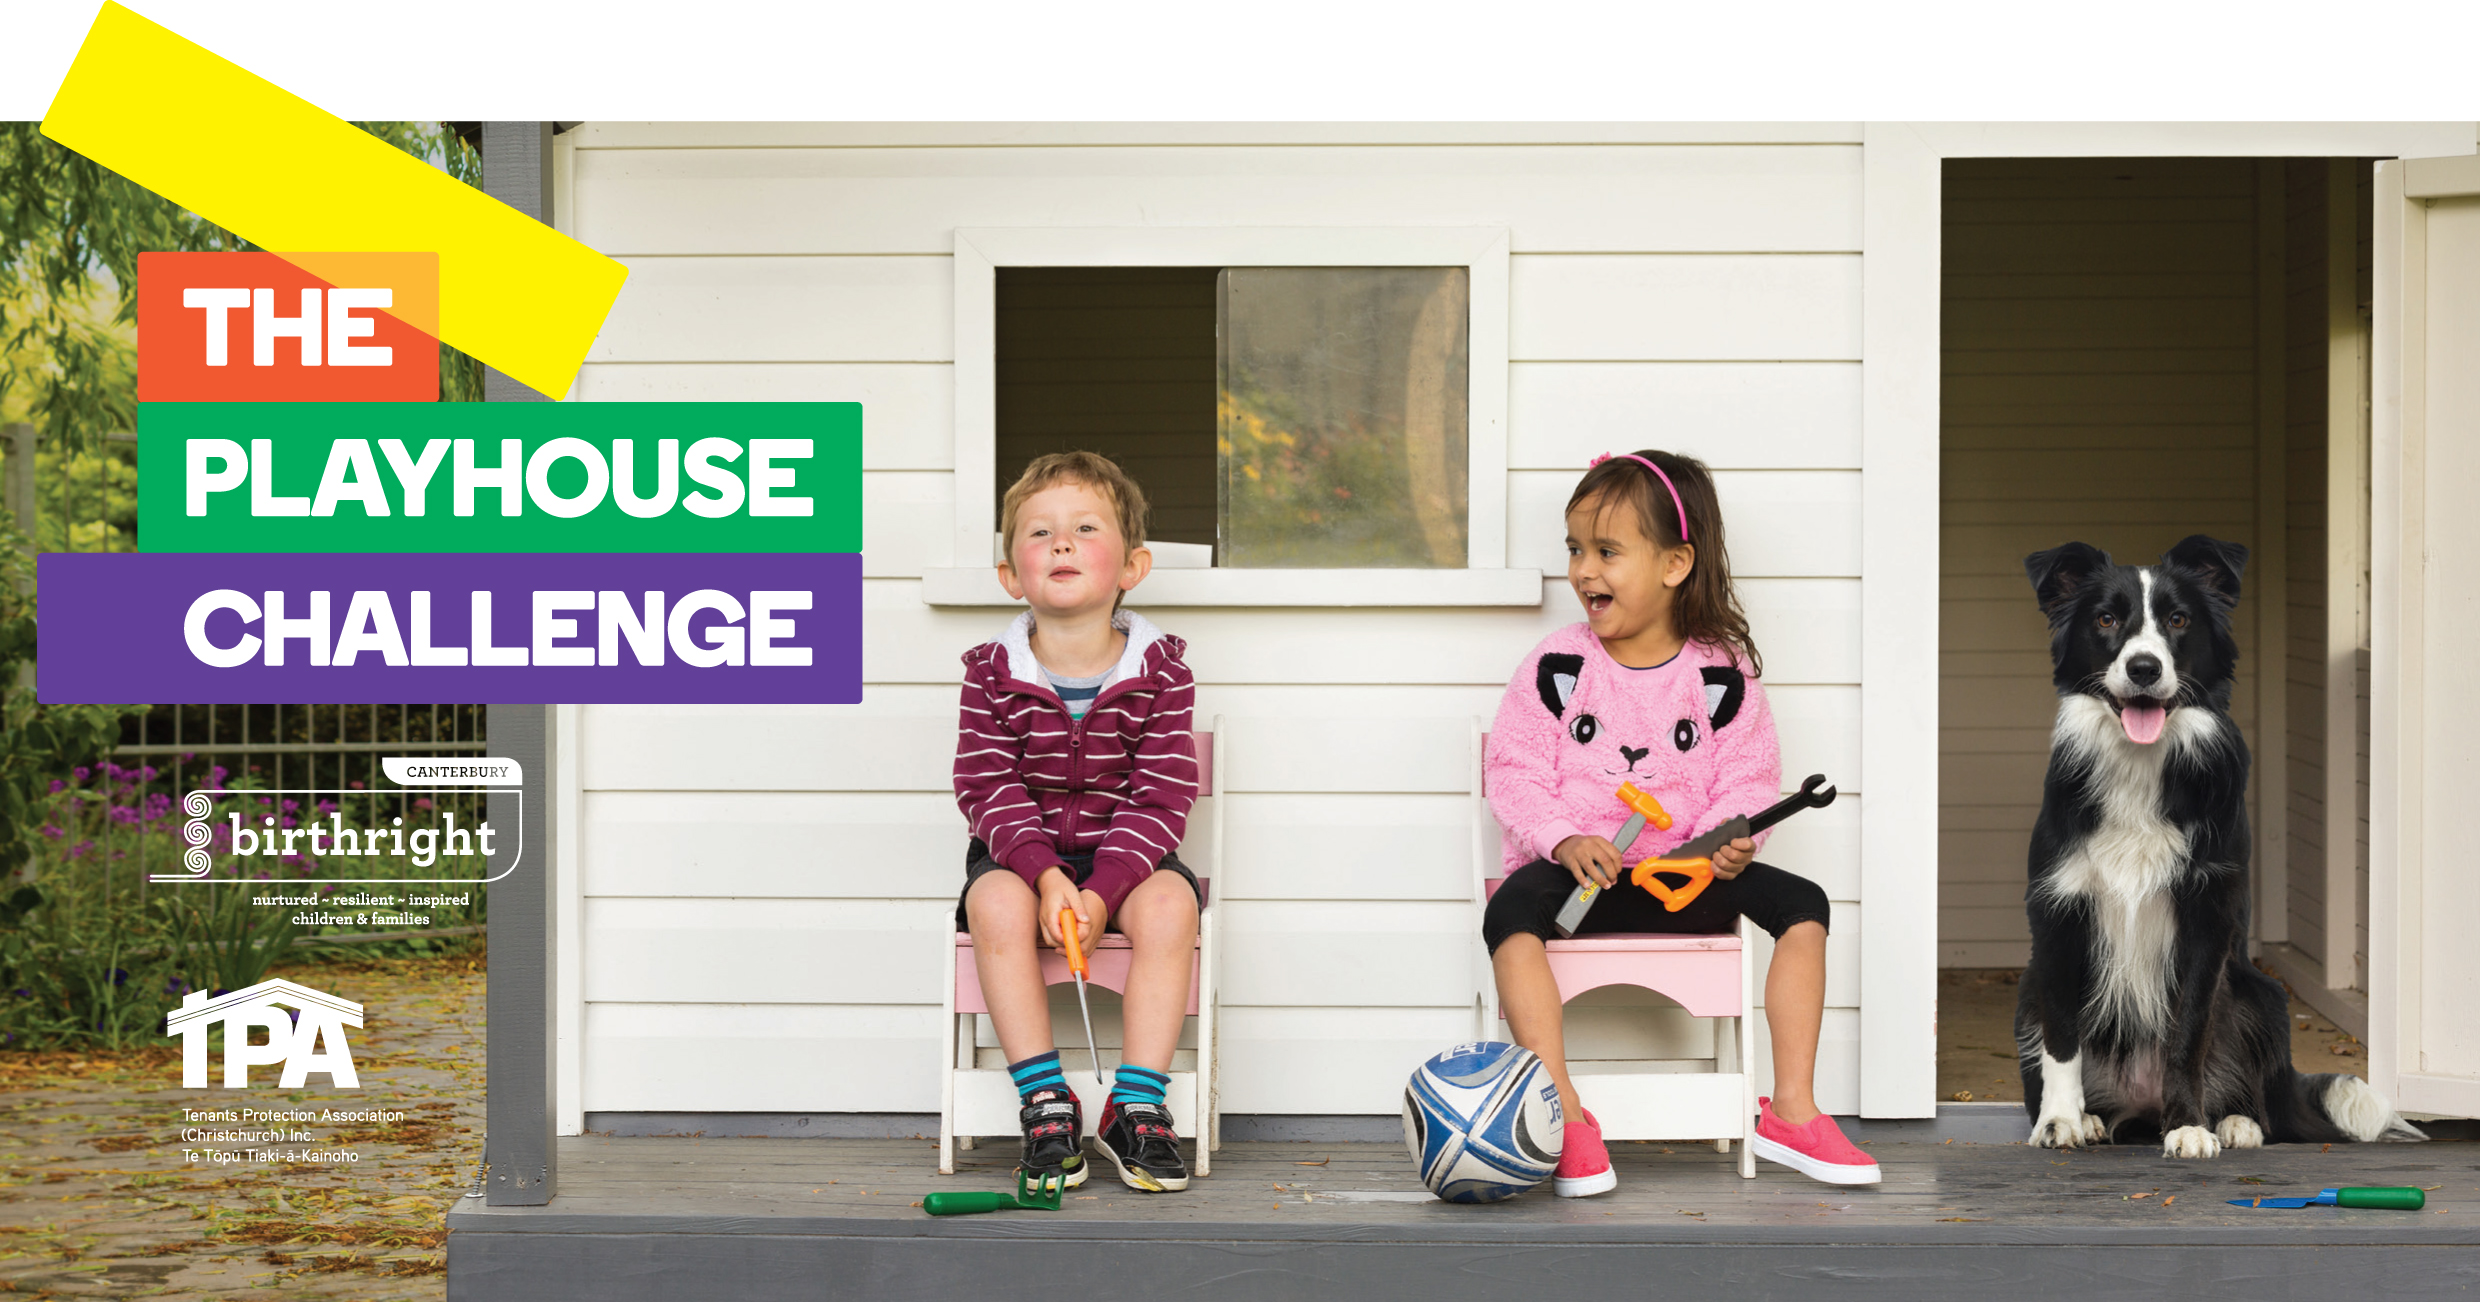 The Star Home & Leisure Show sponsors Playhouse Challenge 2017